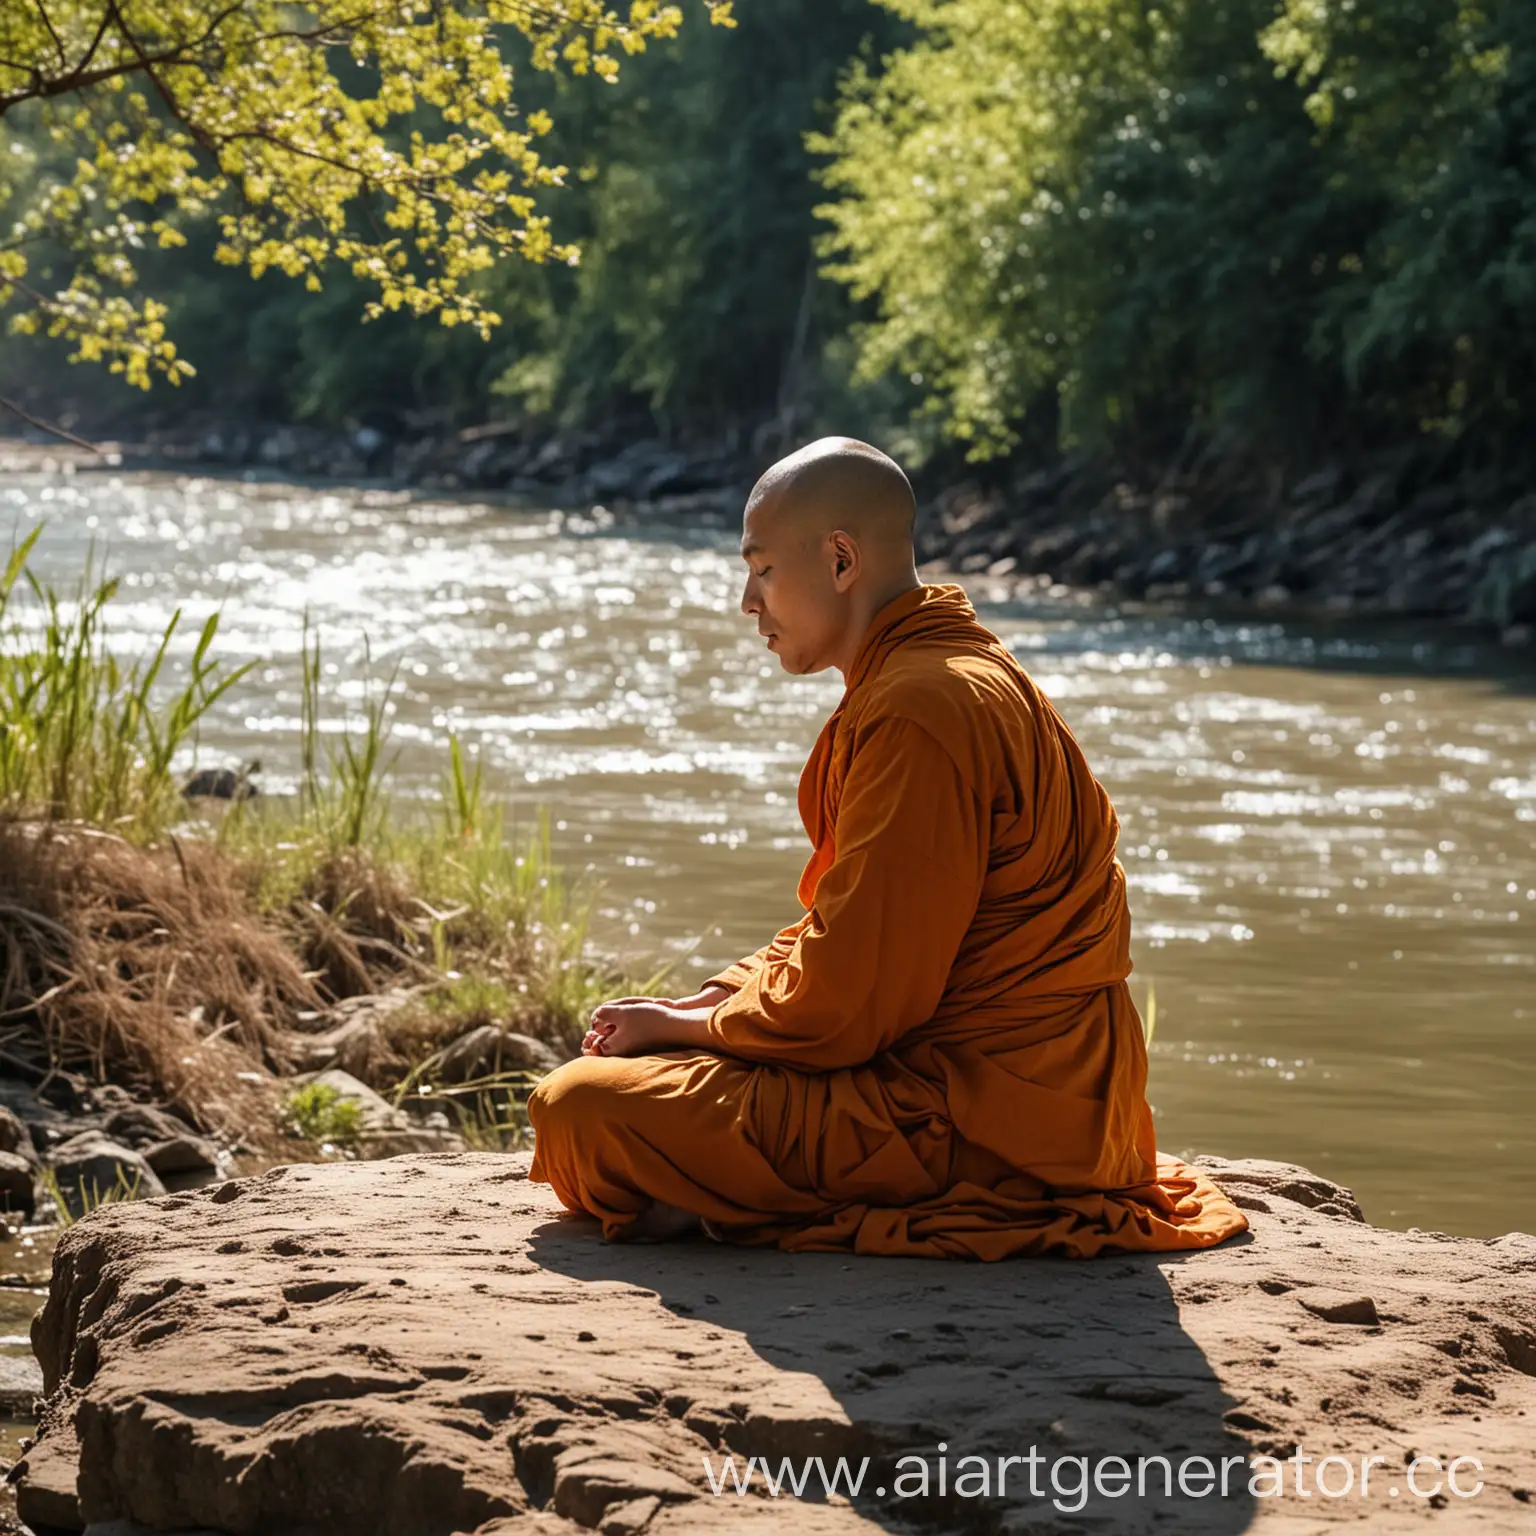 Sunny-Riverbank-Meditation-Tranquil-Monk-Reflects-by-the-Water